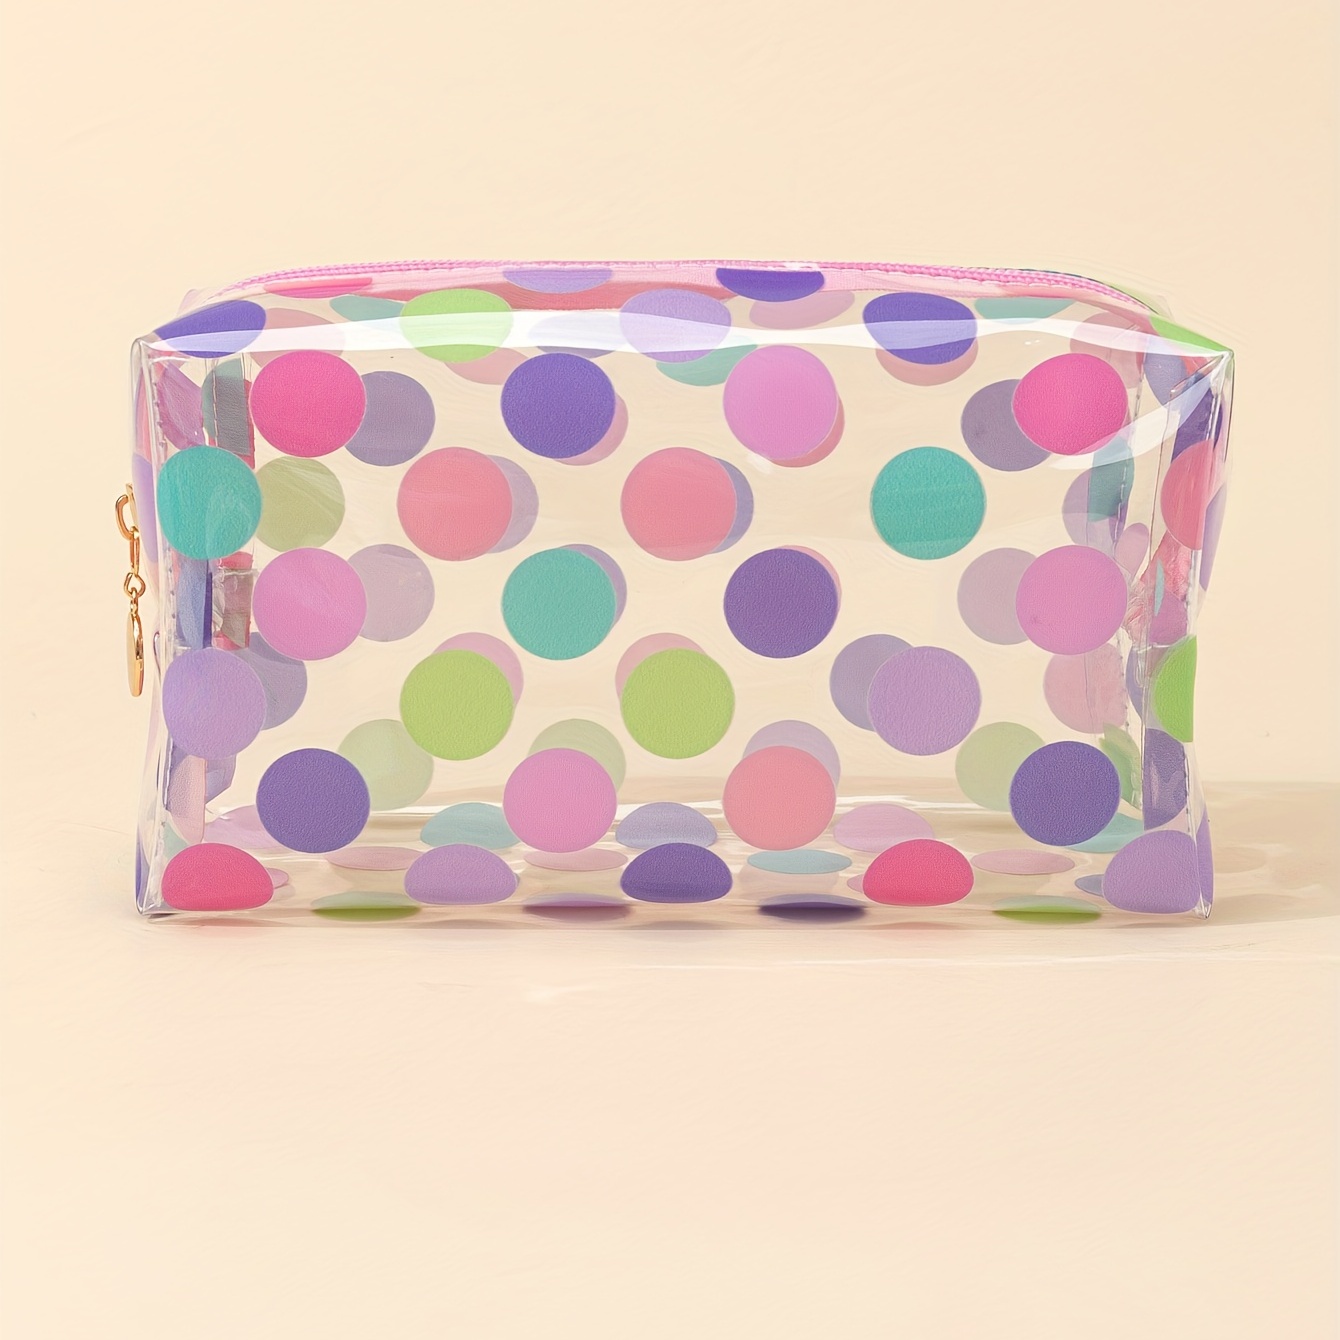 

Elegant Polka Dot Makeup Bag - Roomy Travel Zipper Pouch For Cosmetics And Toiletries - Water-resistant And Organizer For Women And Ladies - Mother's Day Cosmetic Bag